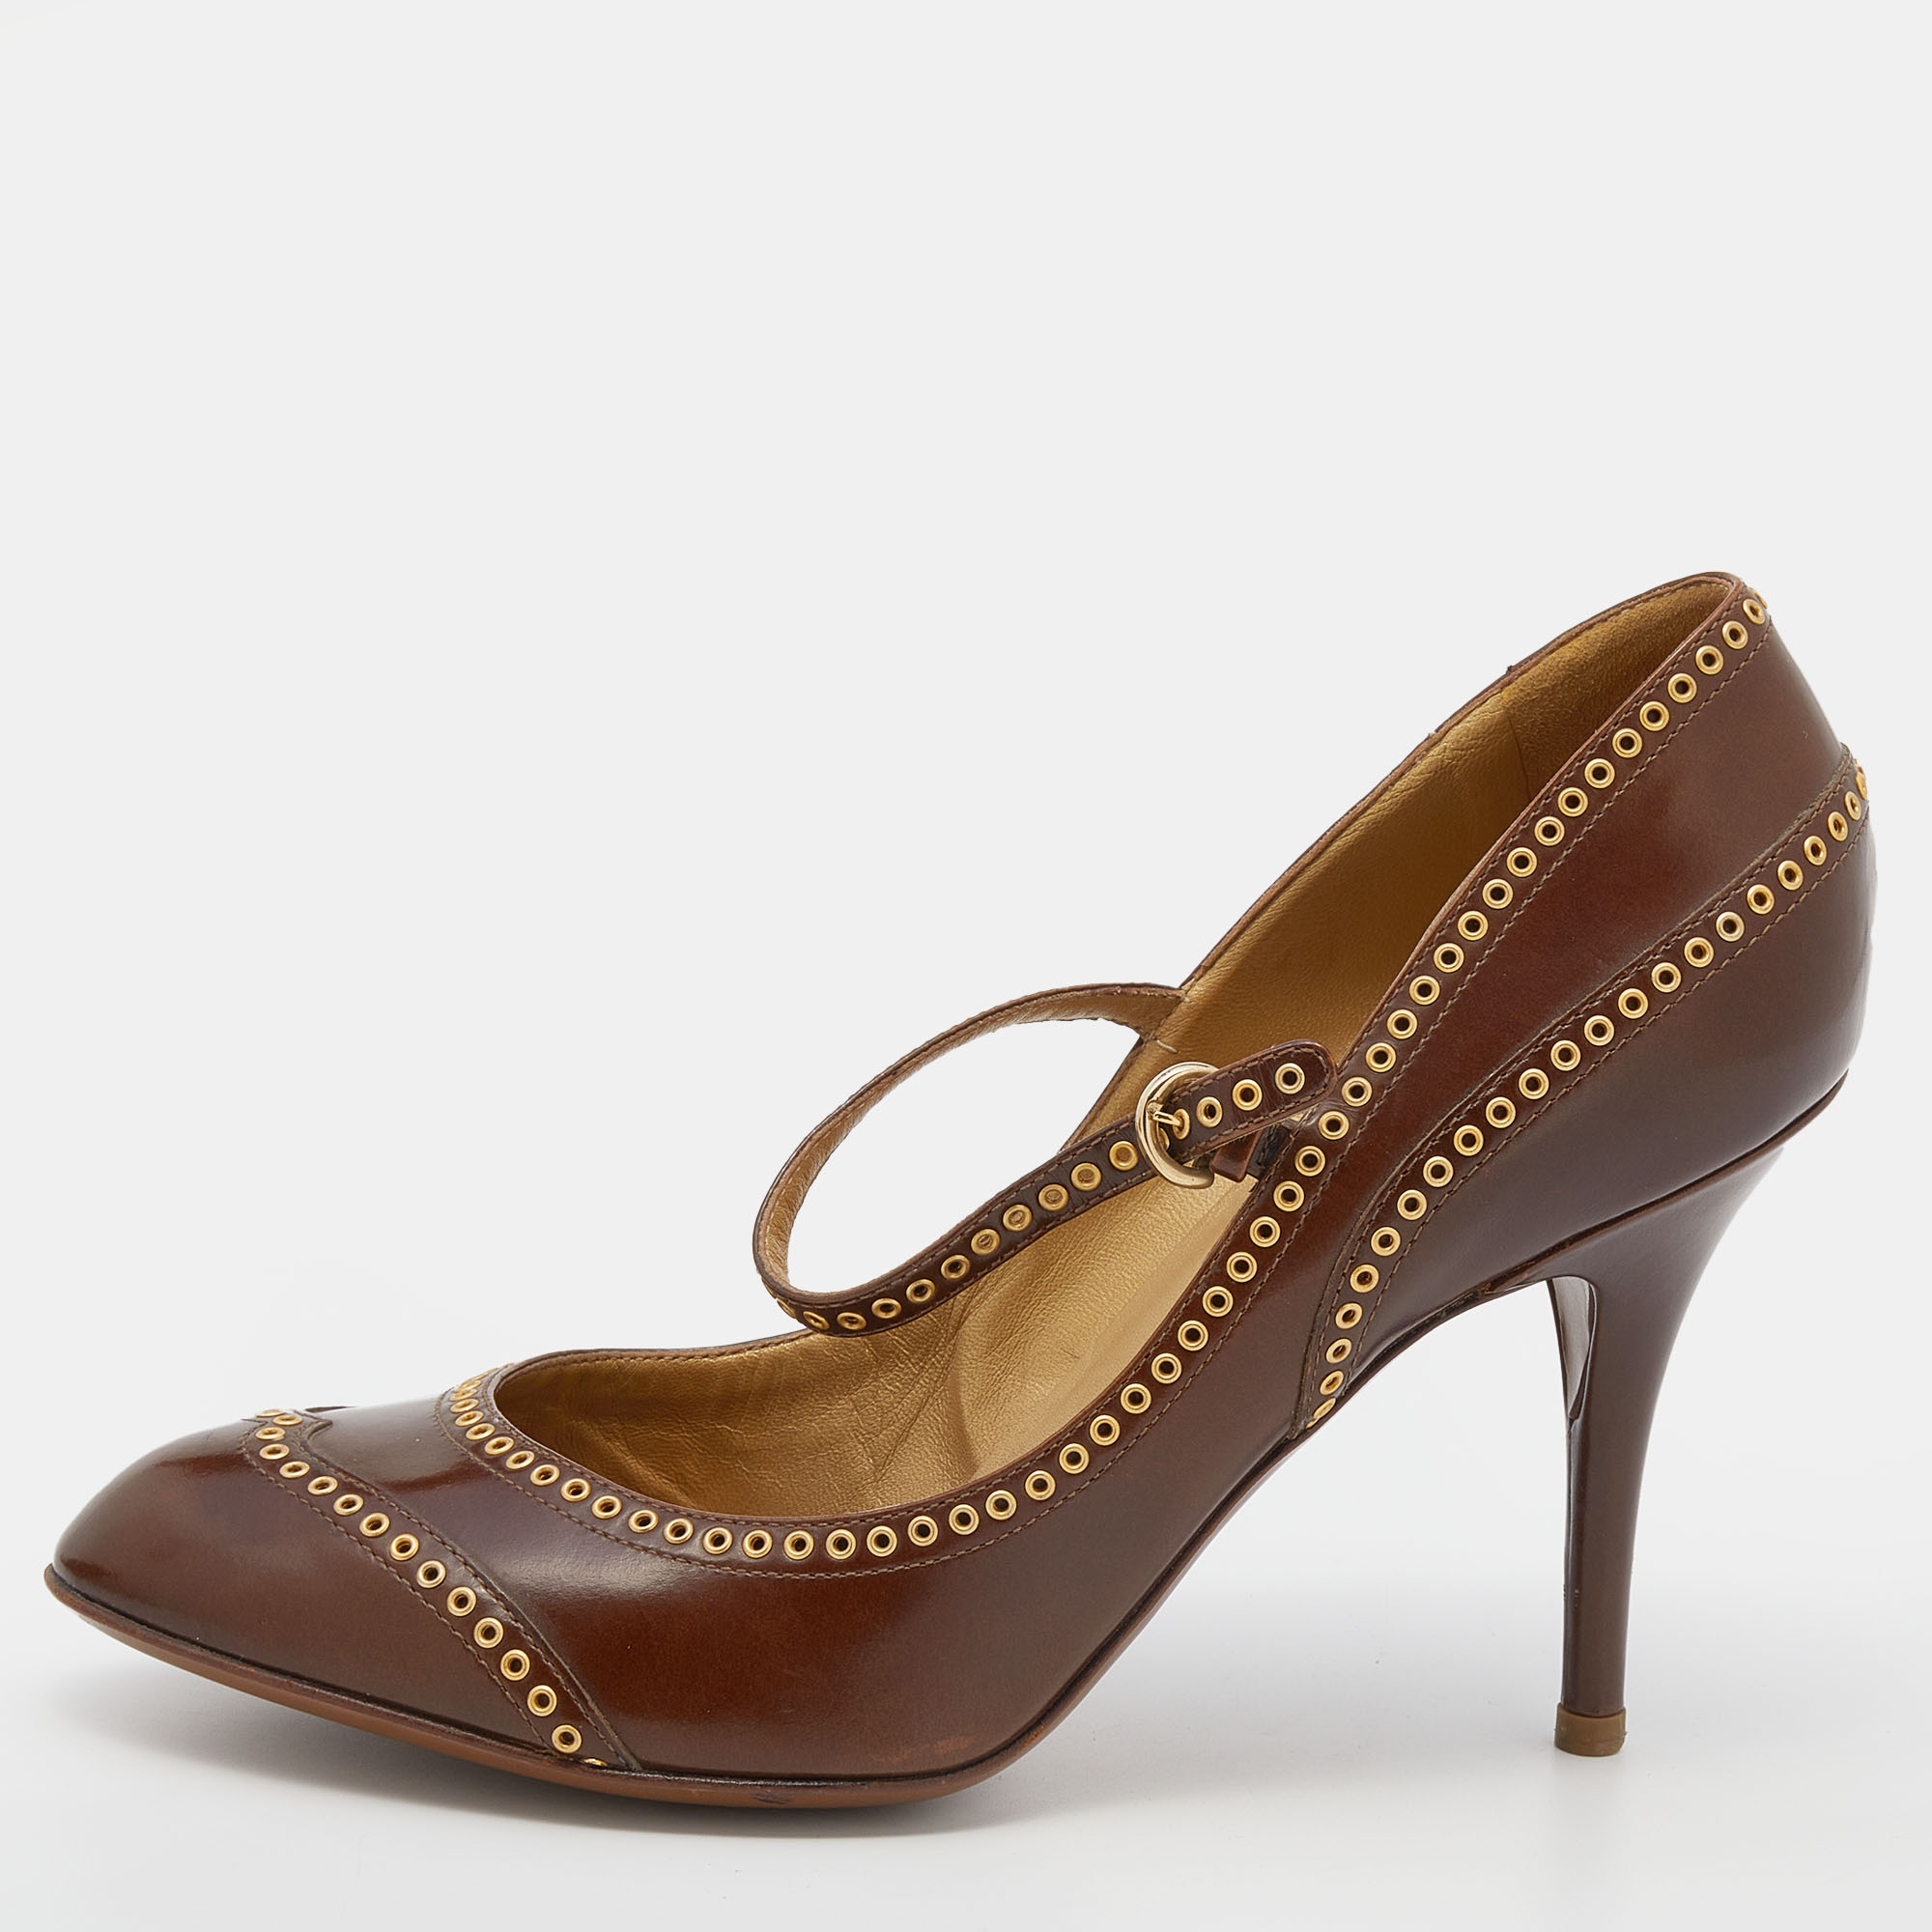 Sergio rossi brown leather eyelet mary jane pumps size 40